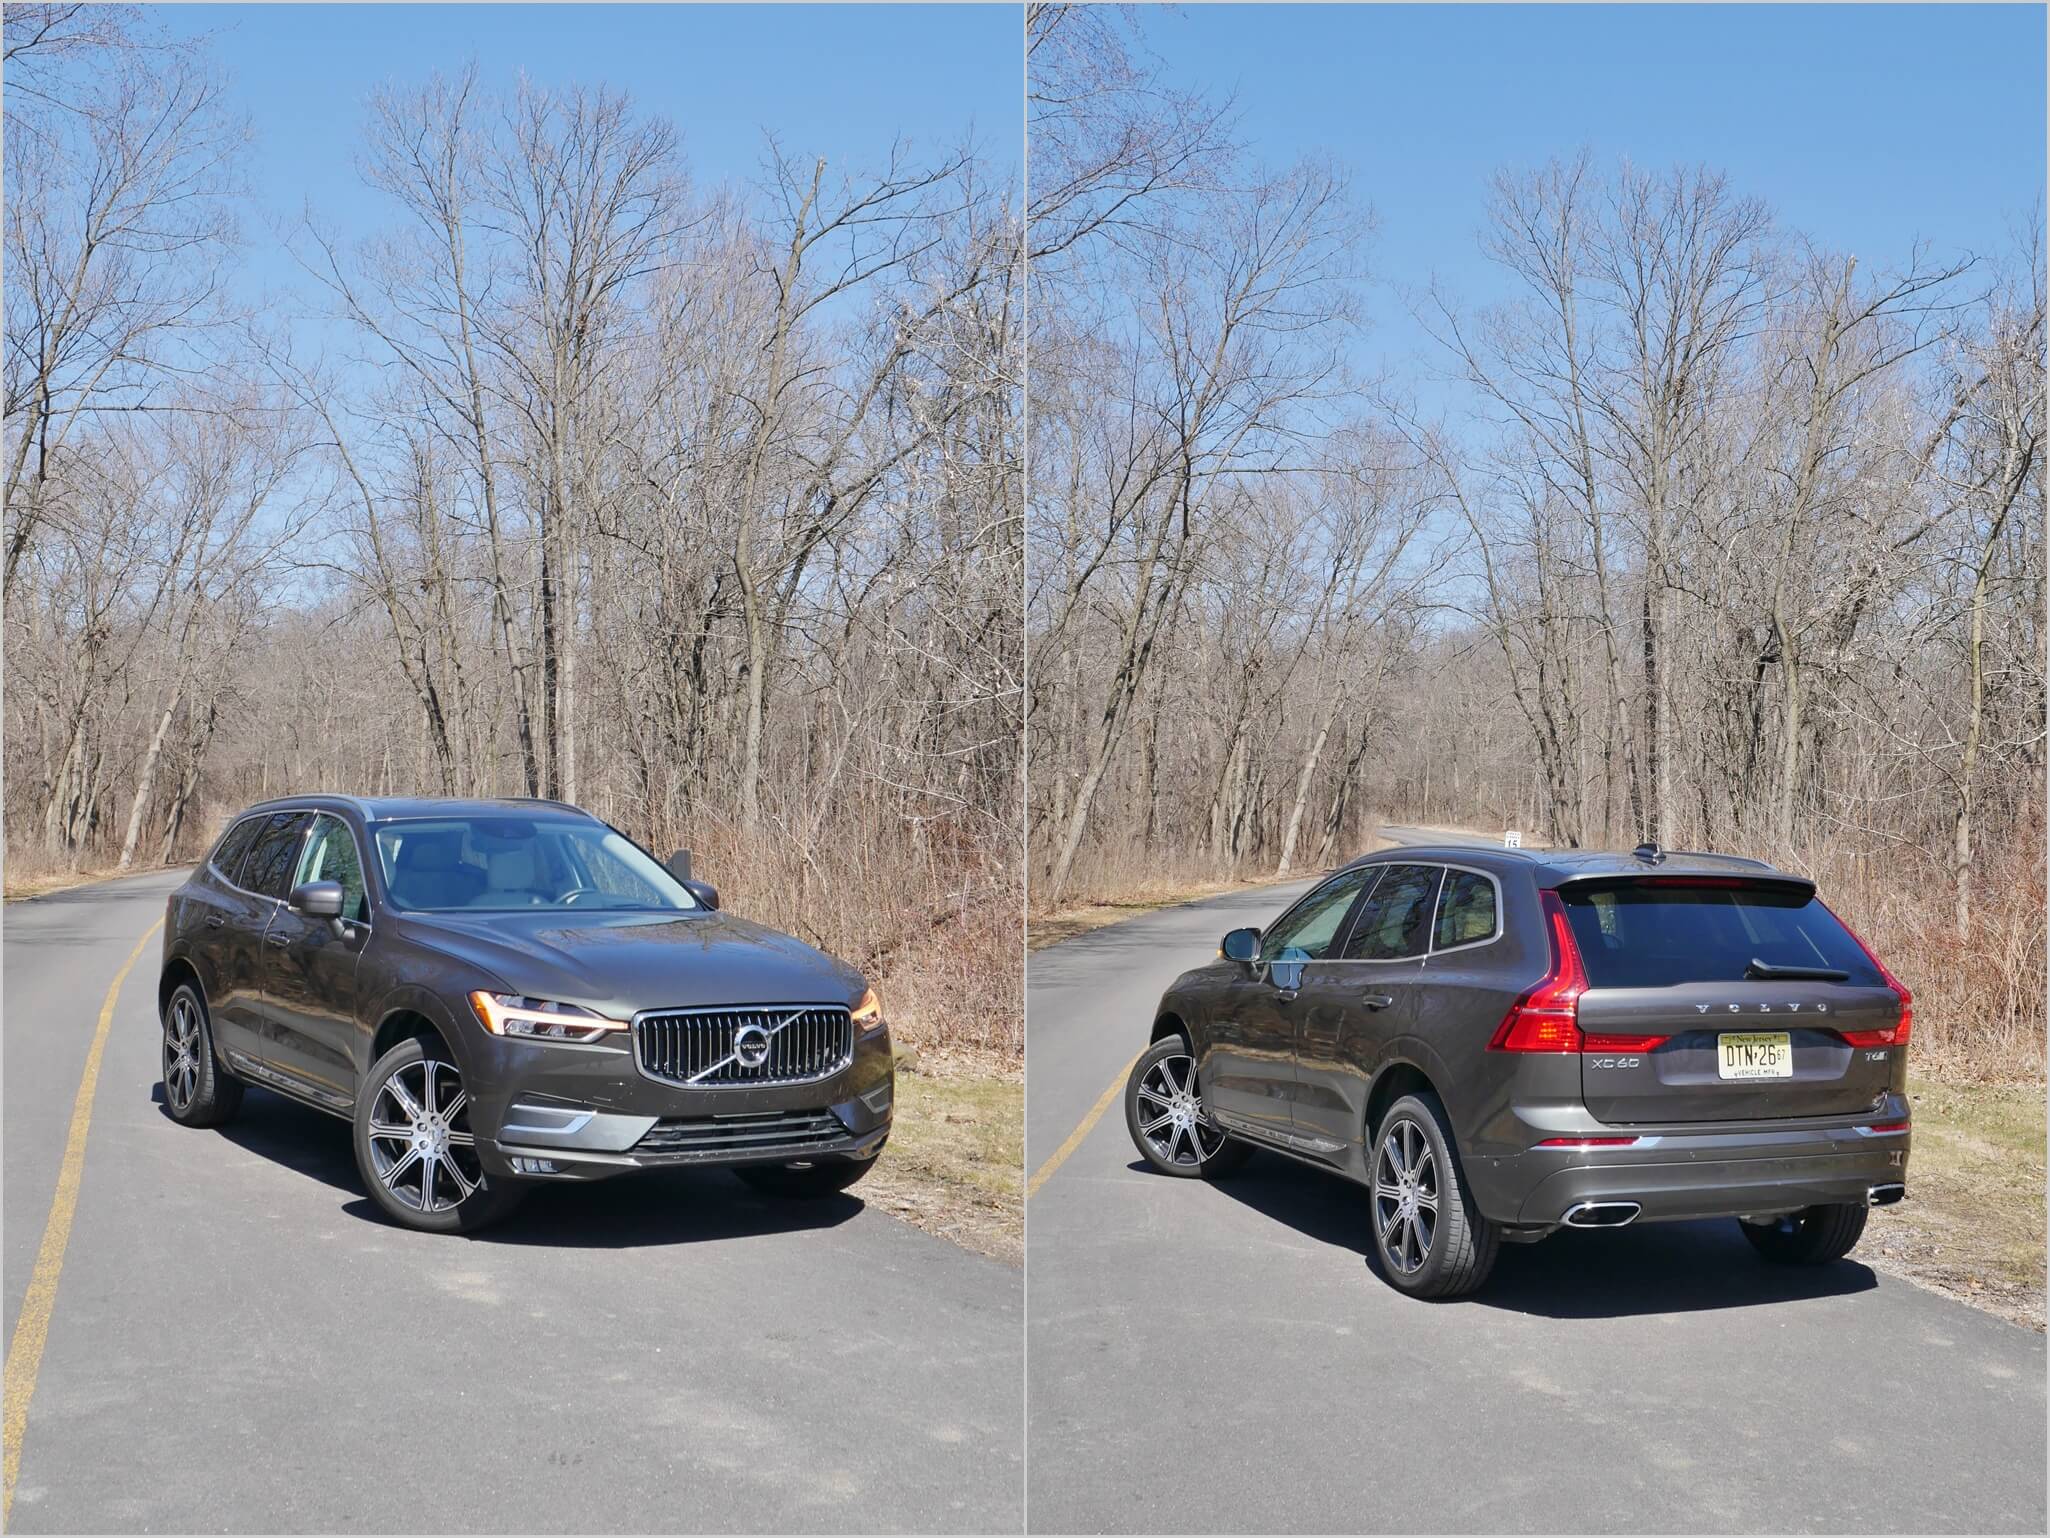 2018 Volvo XC60 T6 AWD Inscription: Crisply cut, technical cutting edge reboot of best selling Volvo in the U.S.